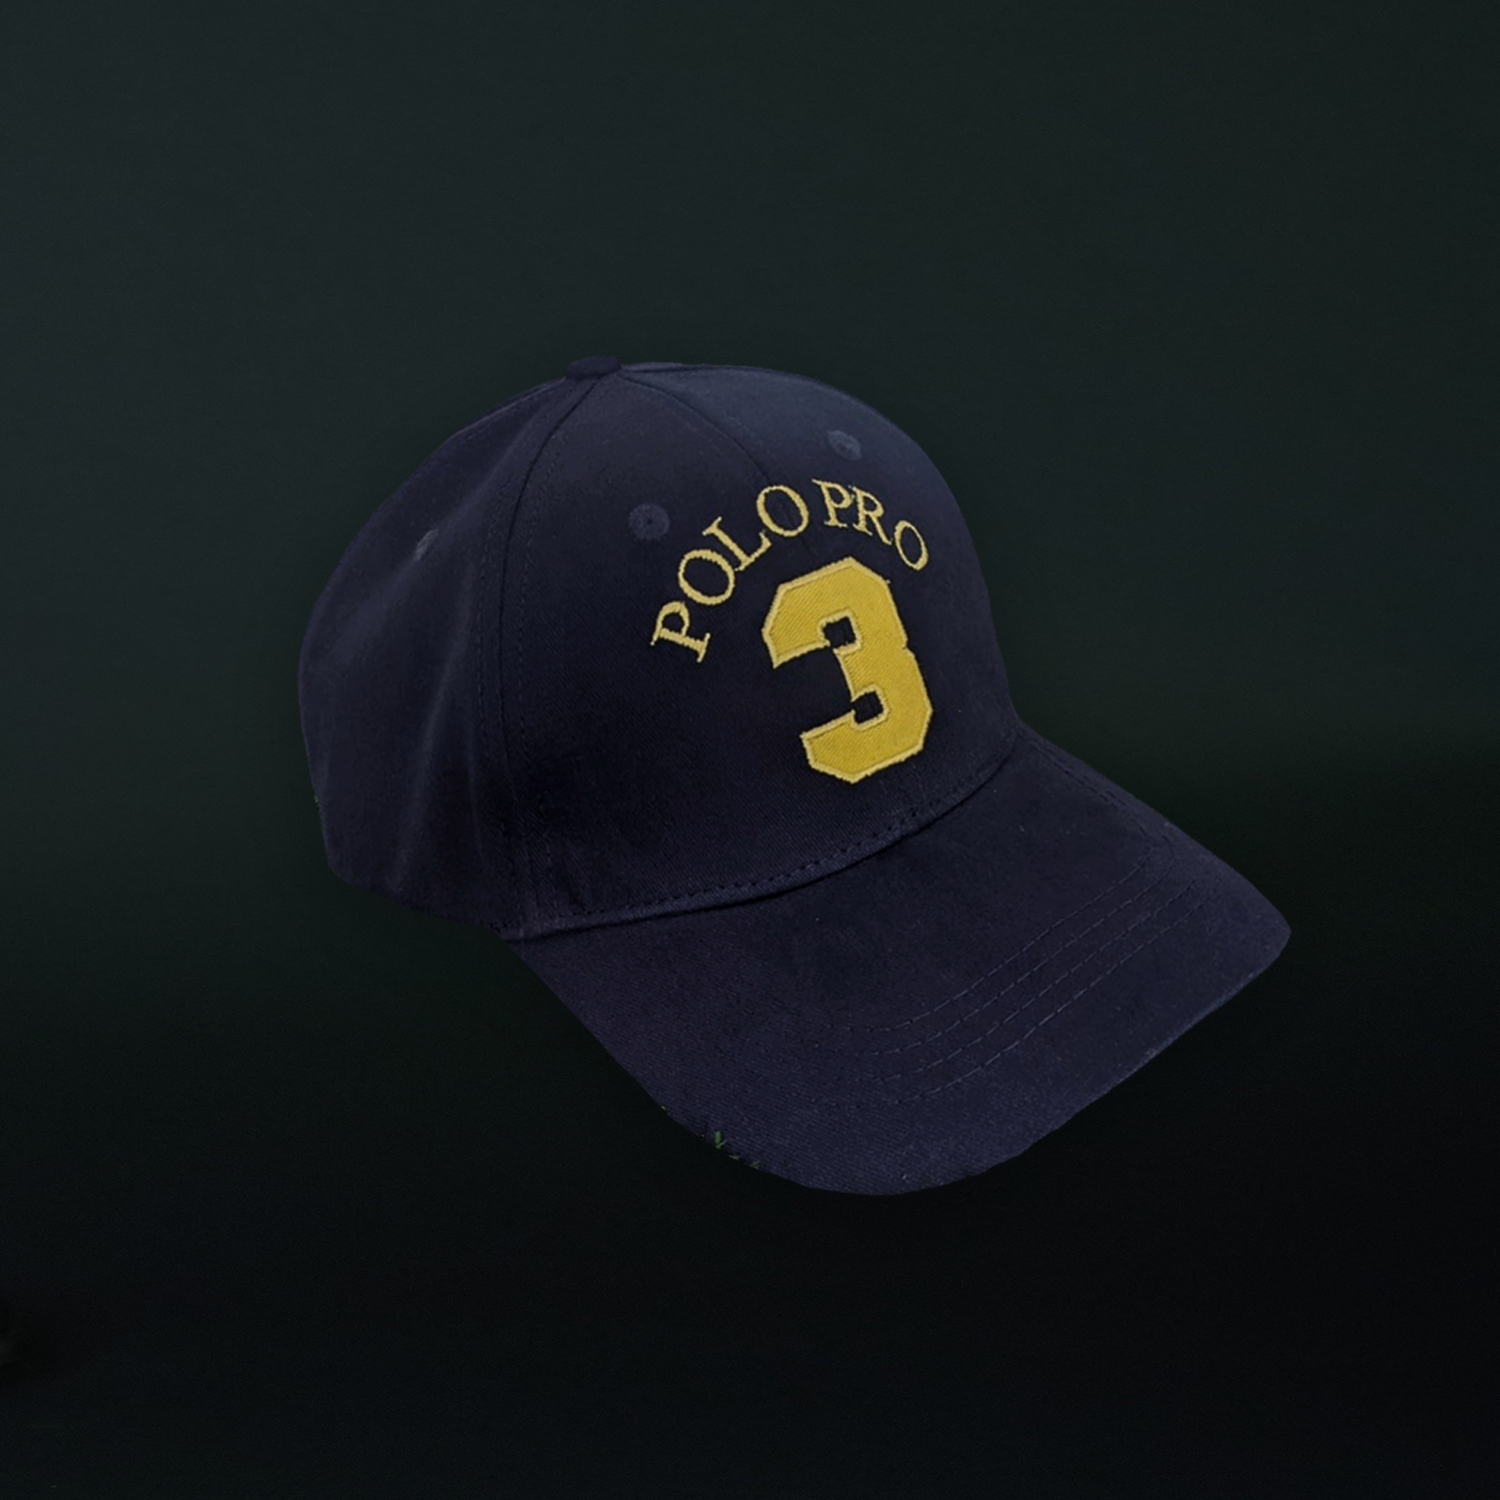 Photo of Polo Pro Cap, number 0